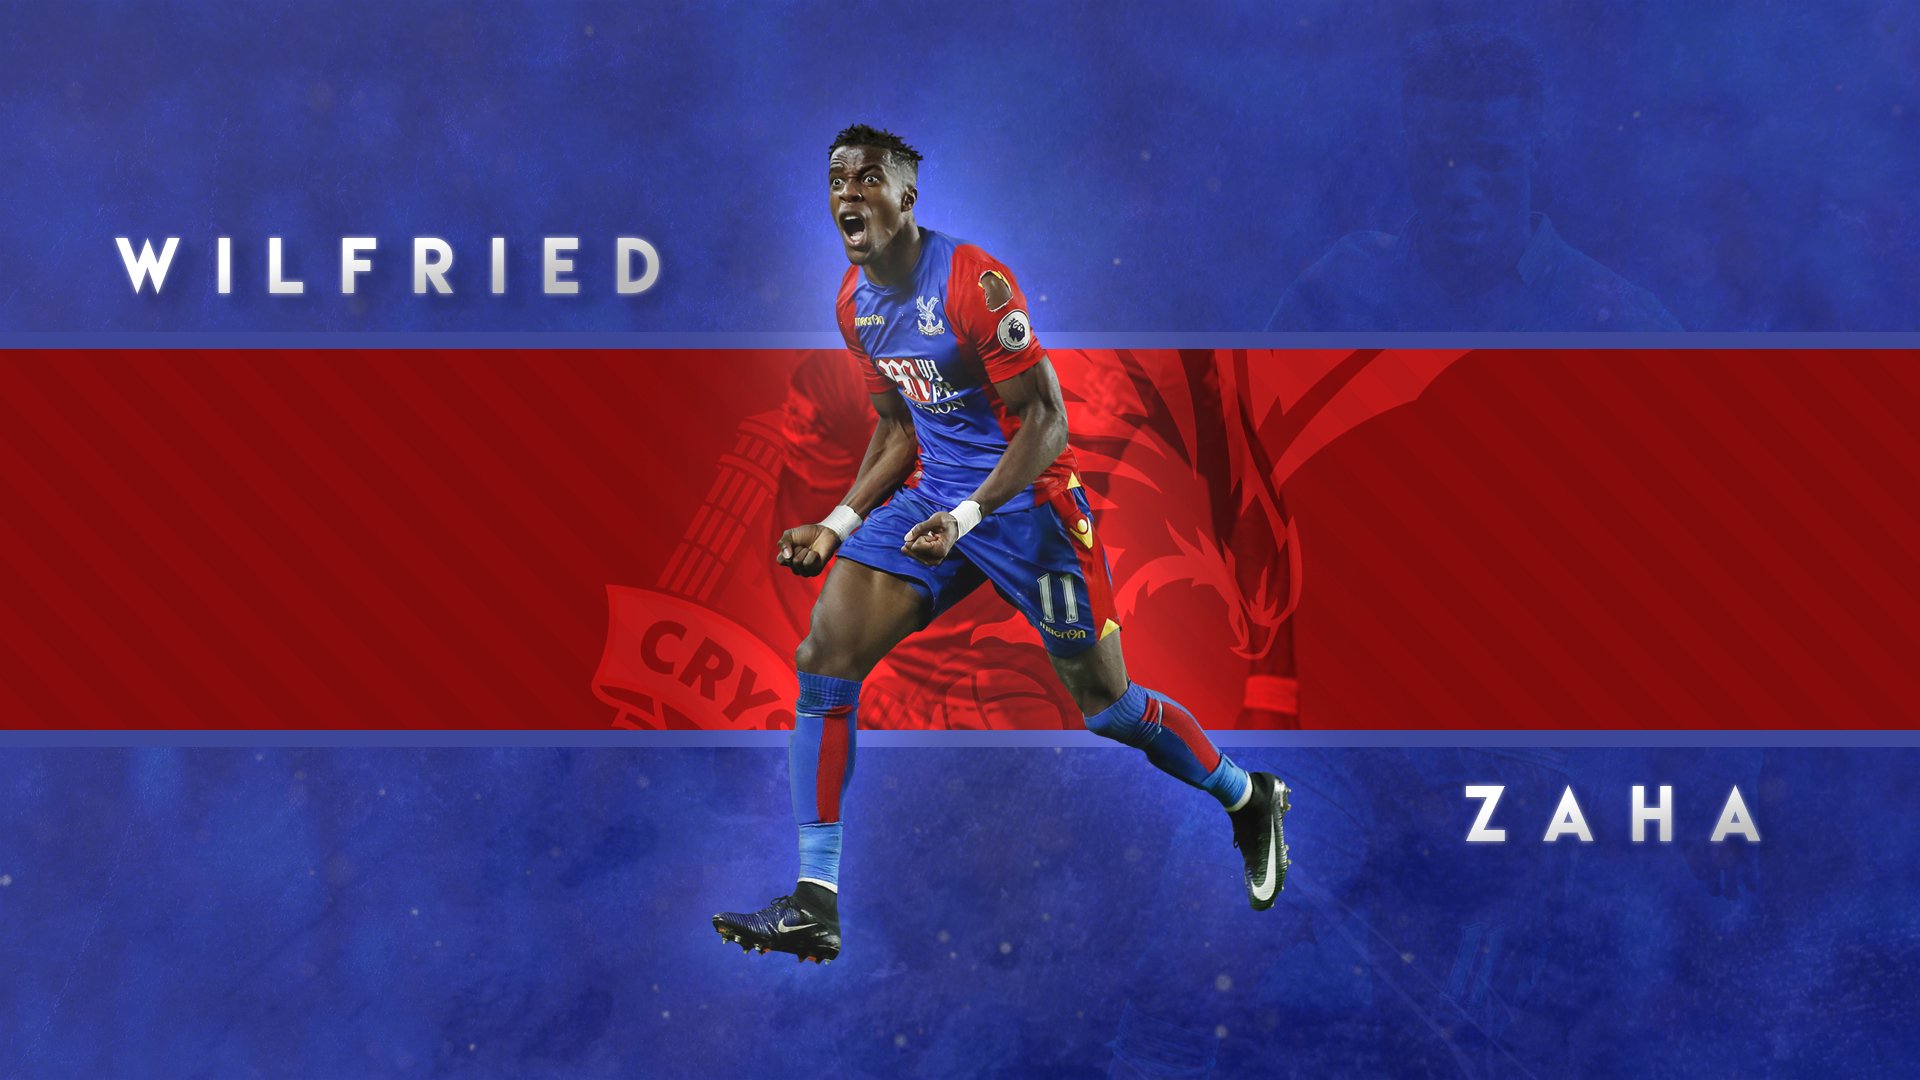 Crystal Palace F.C. Wallpapers